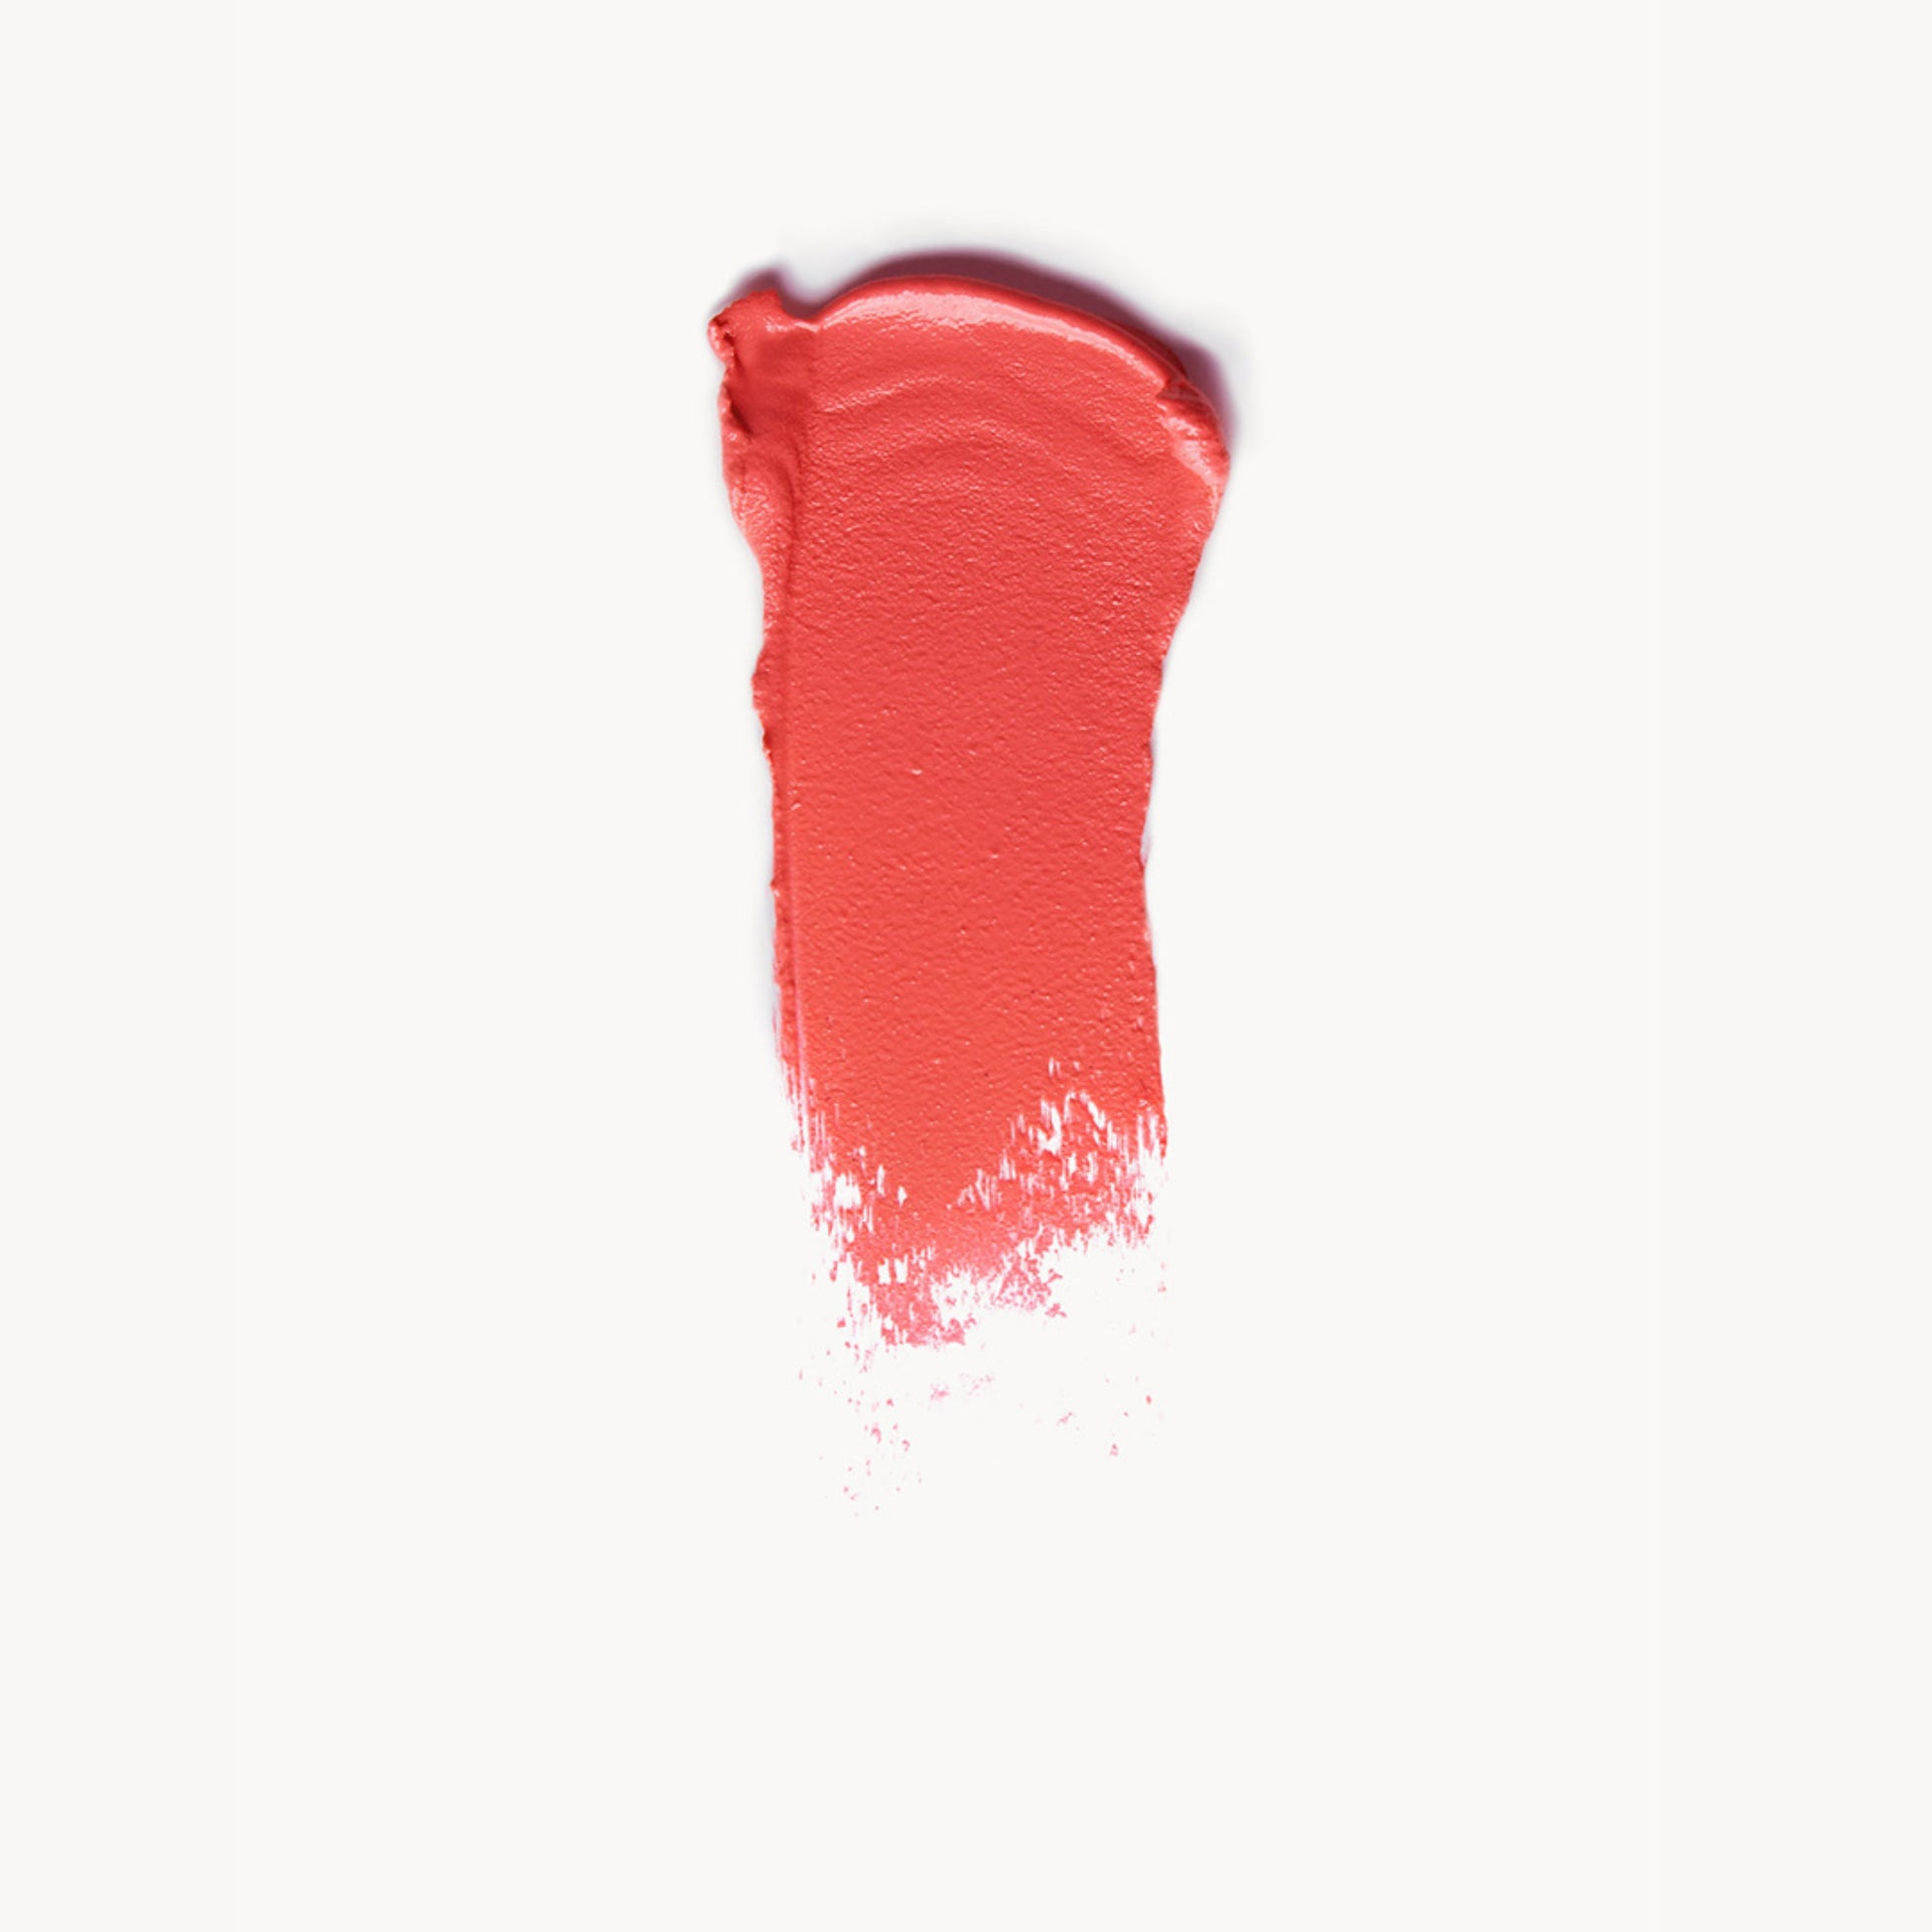 A wipe of bright coral cream blush on a white background